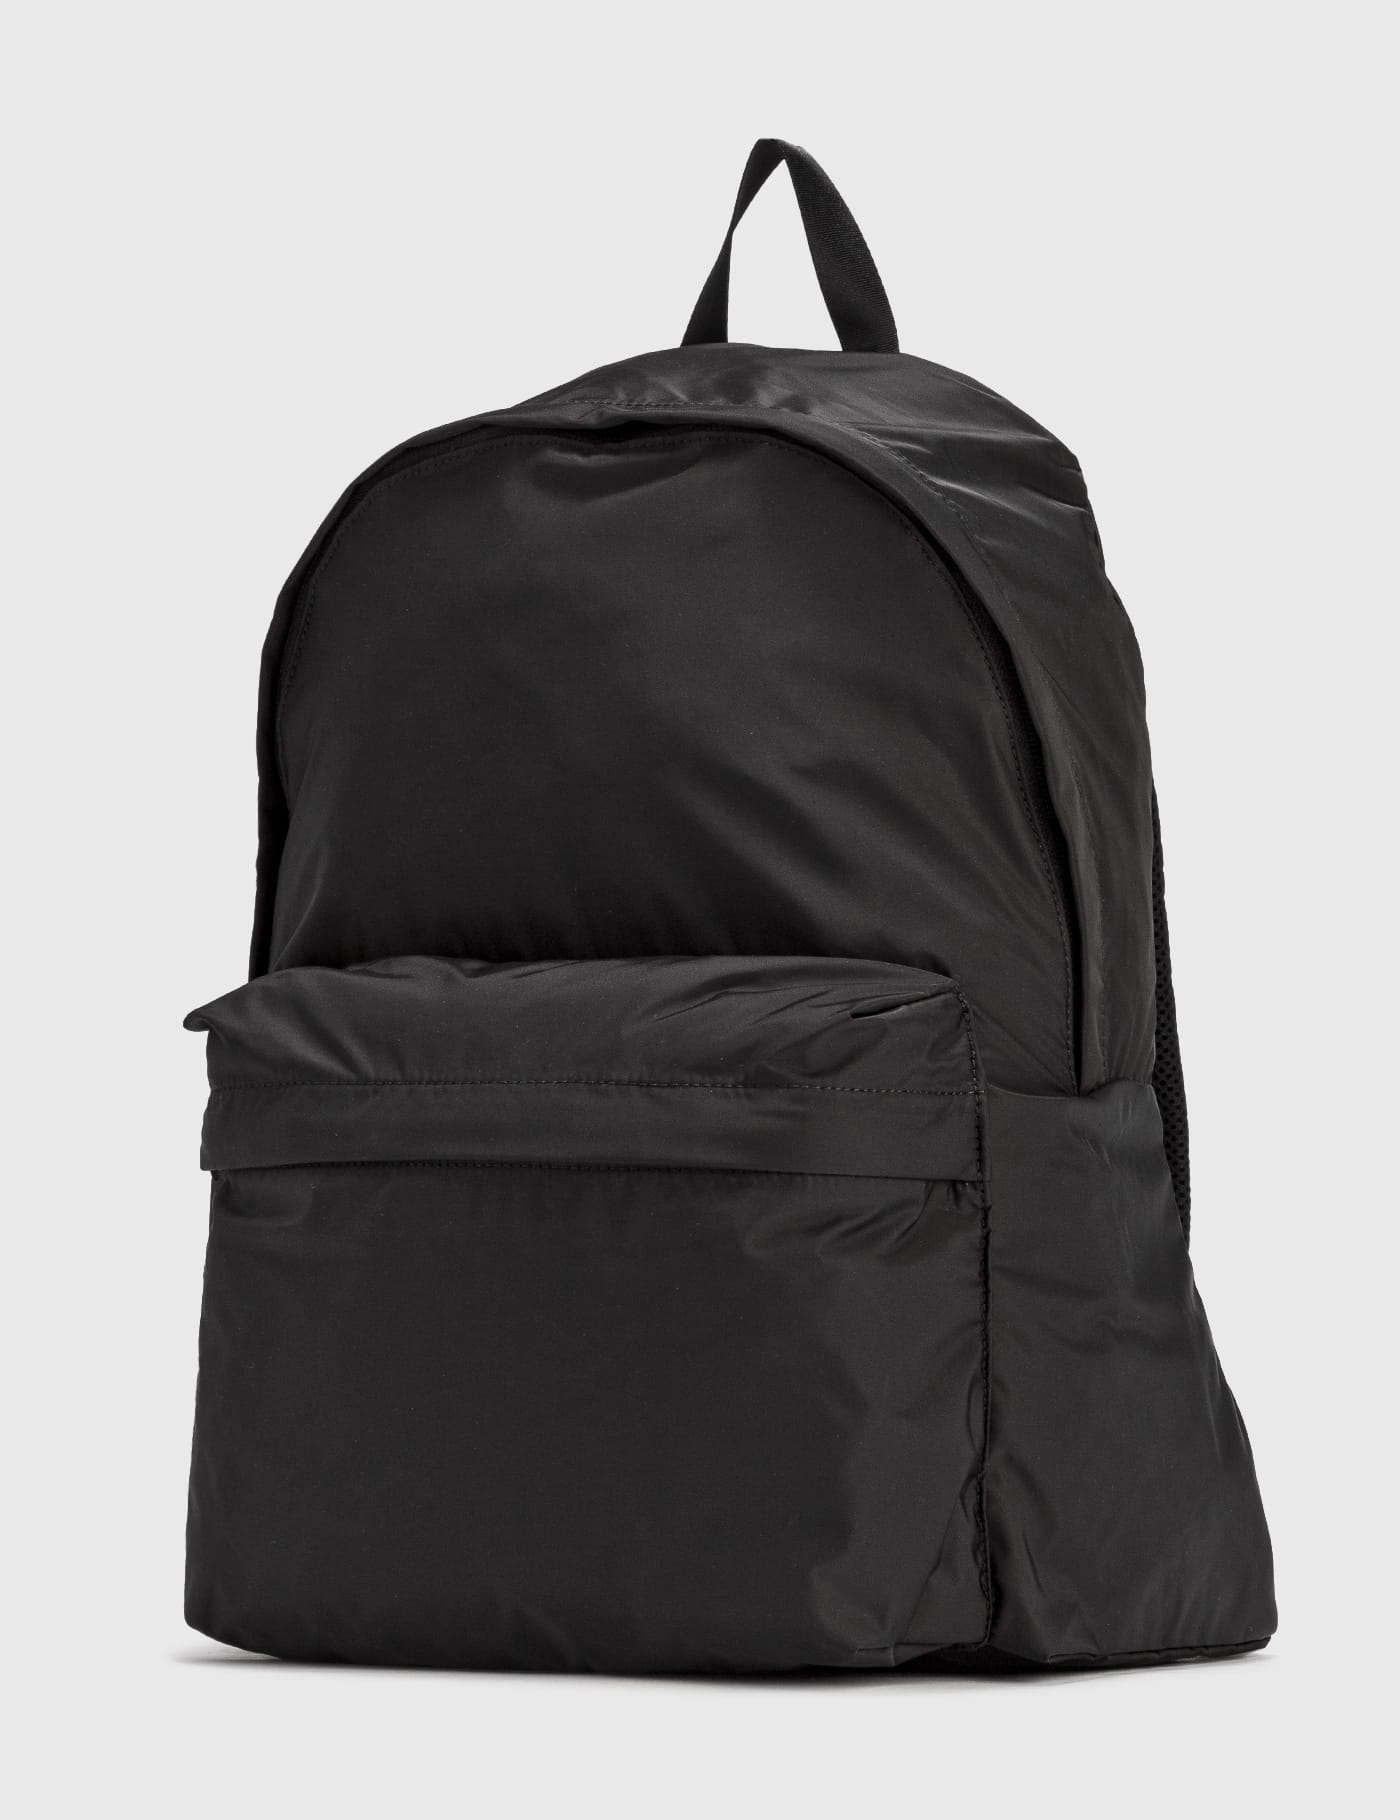 RAMIDUS - DAYPACK | HBX - Globally Curated Fashion and Lifestyle